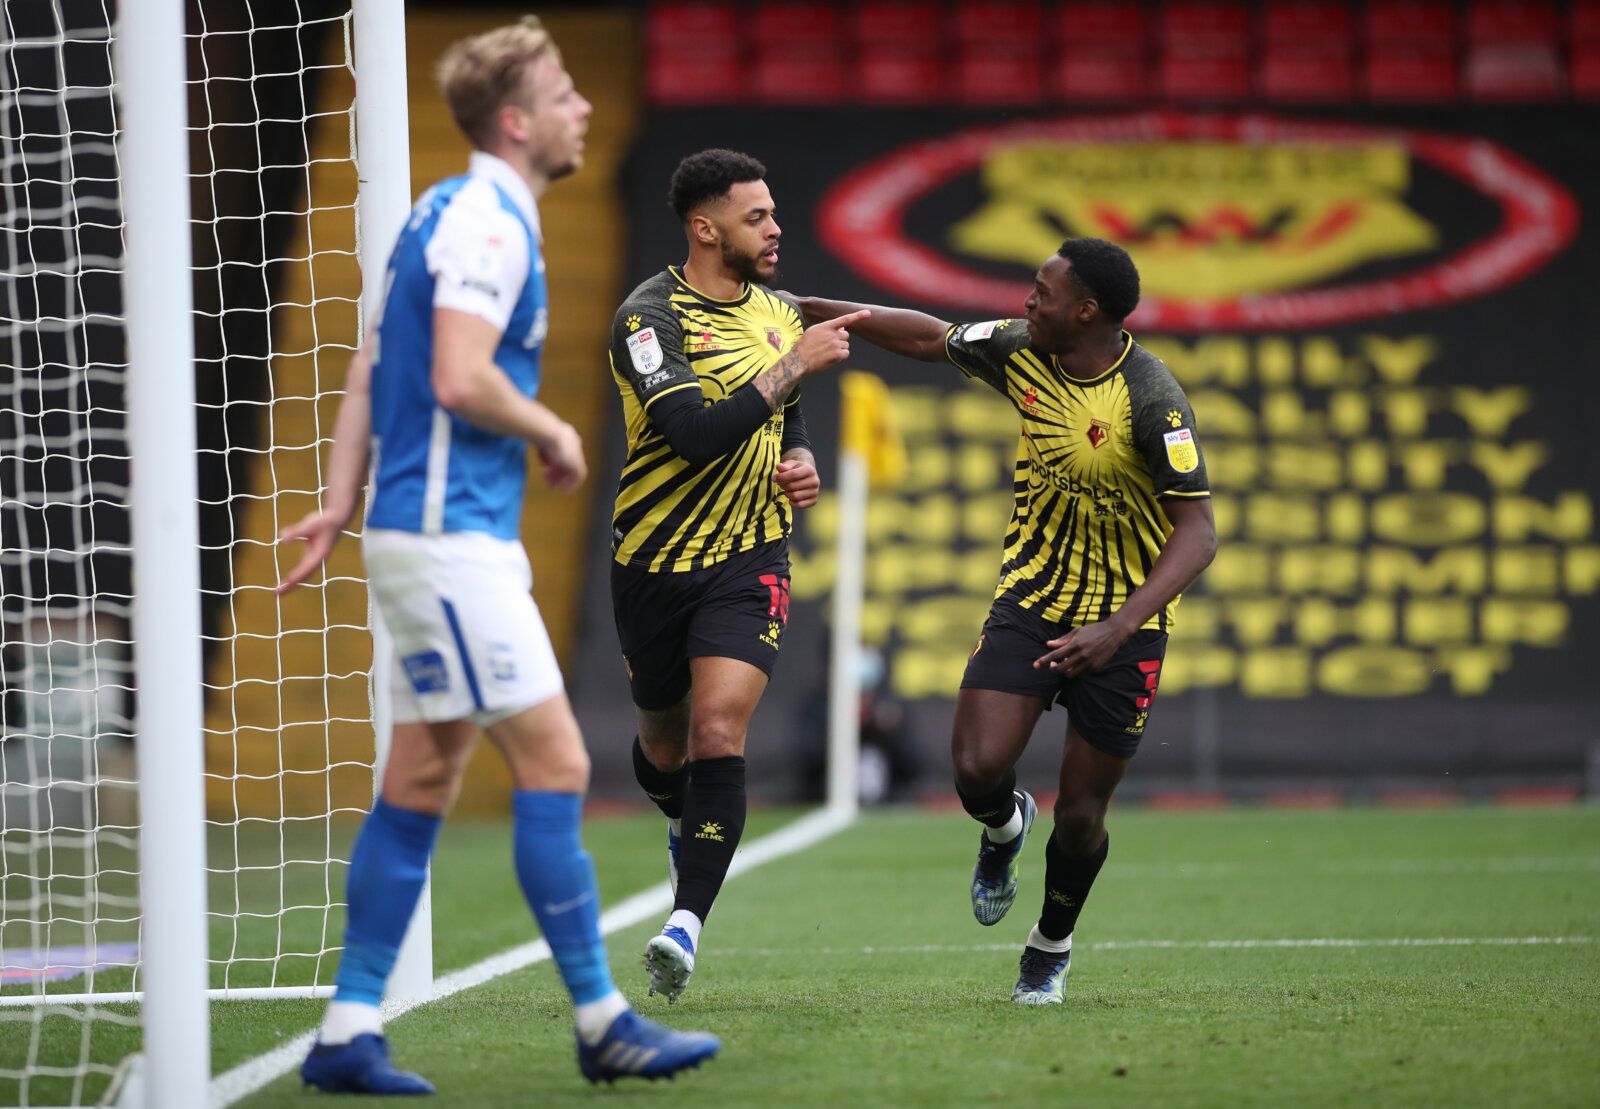 Soccer Football - Championship - Watford v Birmingham City - Vicarage Road, Watford, Britain - March 20, 2021 Watford’s Andre Gray celebrates scoring their third goal Action Images/Peter Cziborra EDITORIAL USE ONLY. No use with unauthorized audio, video, data, fixture lists, club/league logos or 'live' services. Online in-match use limited to 75 images, no video emulation. No use in betting, games or single club /league/player publications.  Please contact your account representative for further